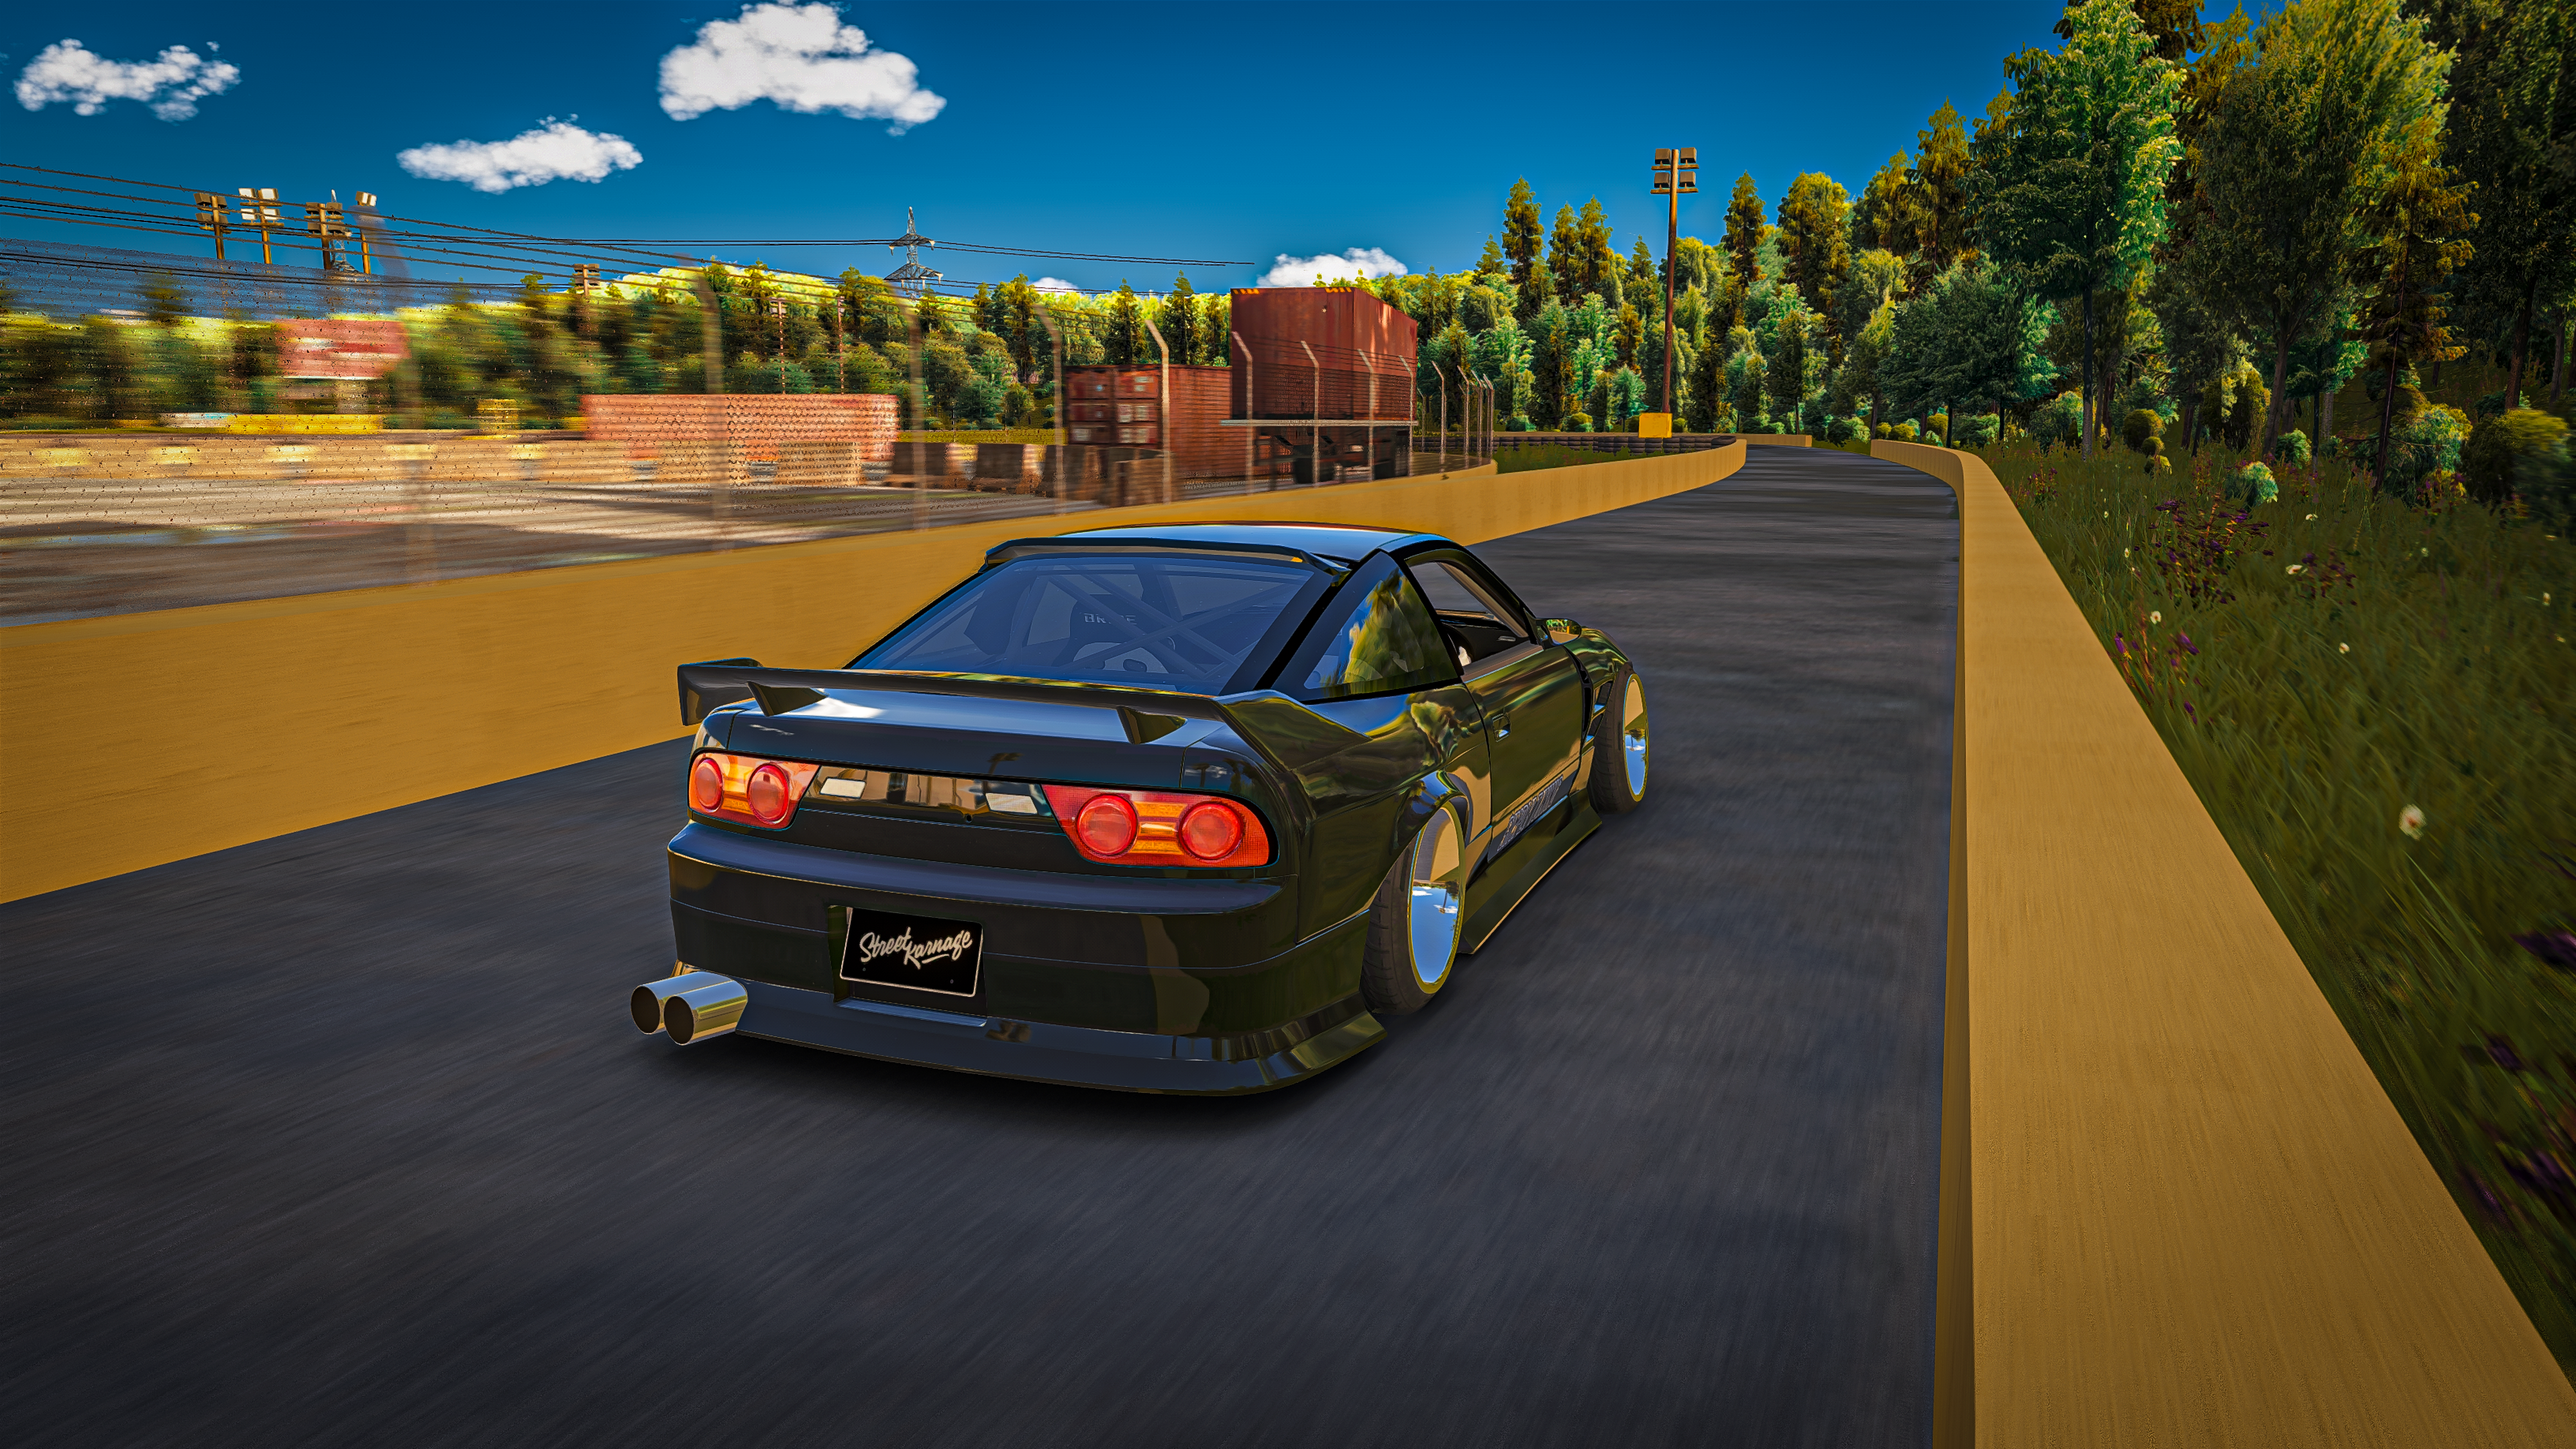 General 3840x2160 Nissan Nissan 180SX drift Assetto Corsa drift cars jungle sky CGI video games reflection vehicle car driving clouds rear view licence plates video game art screen shot motion blur trees fence exhaust pipes taillights blurred